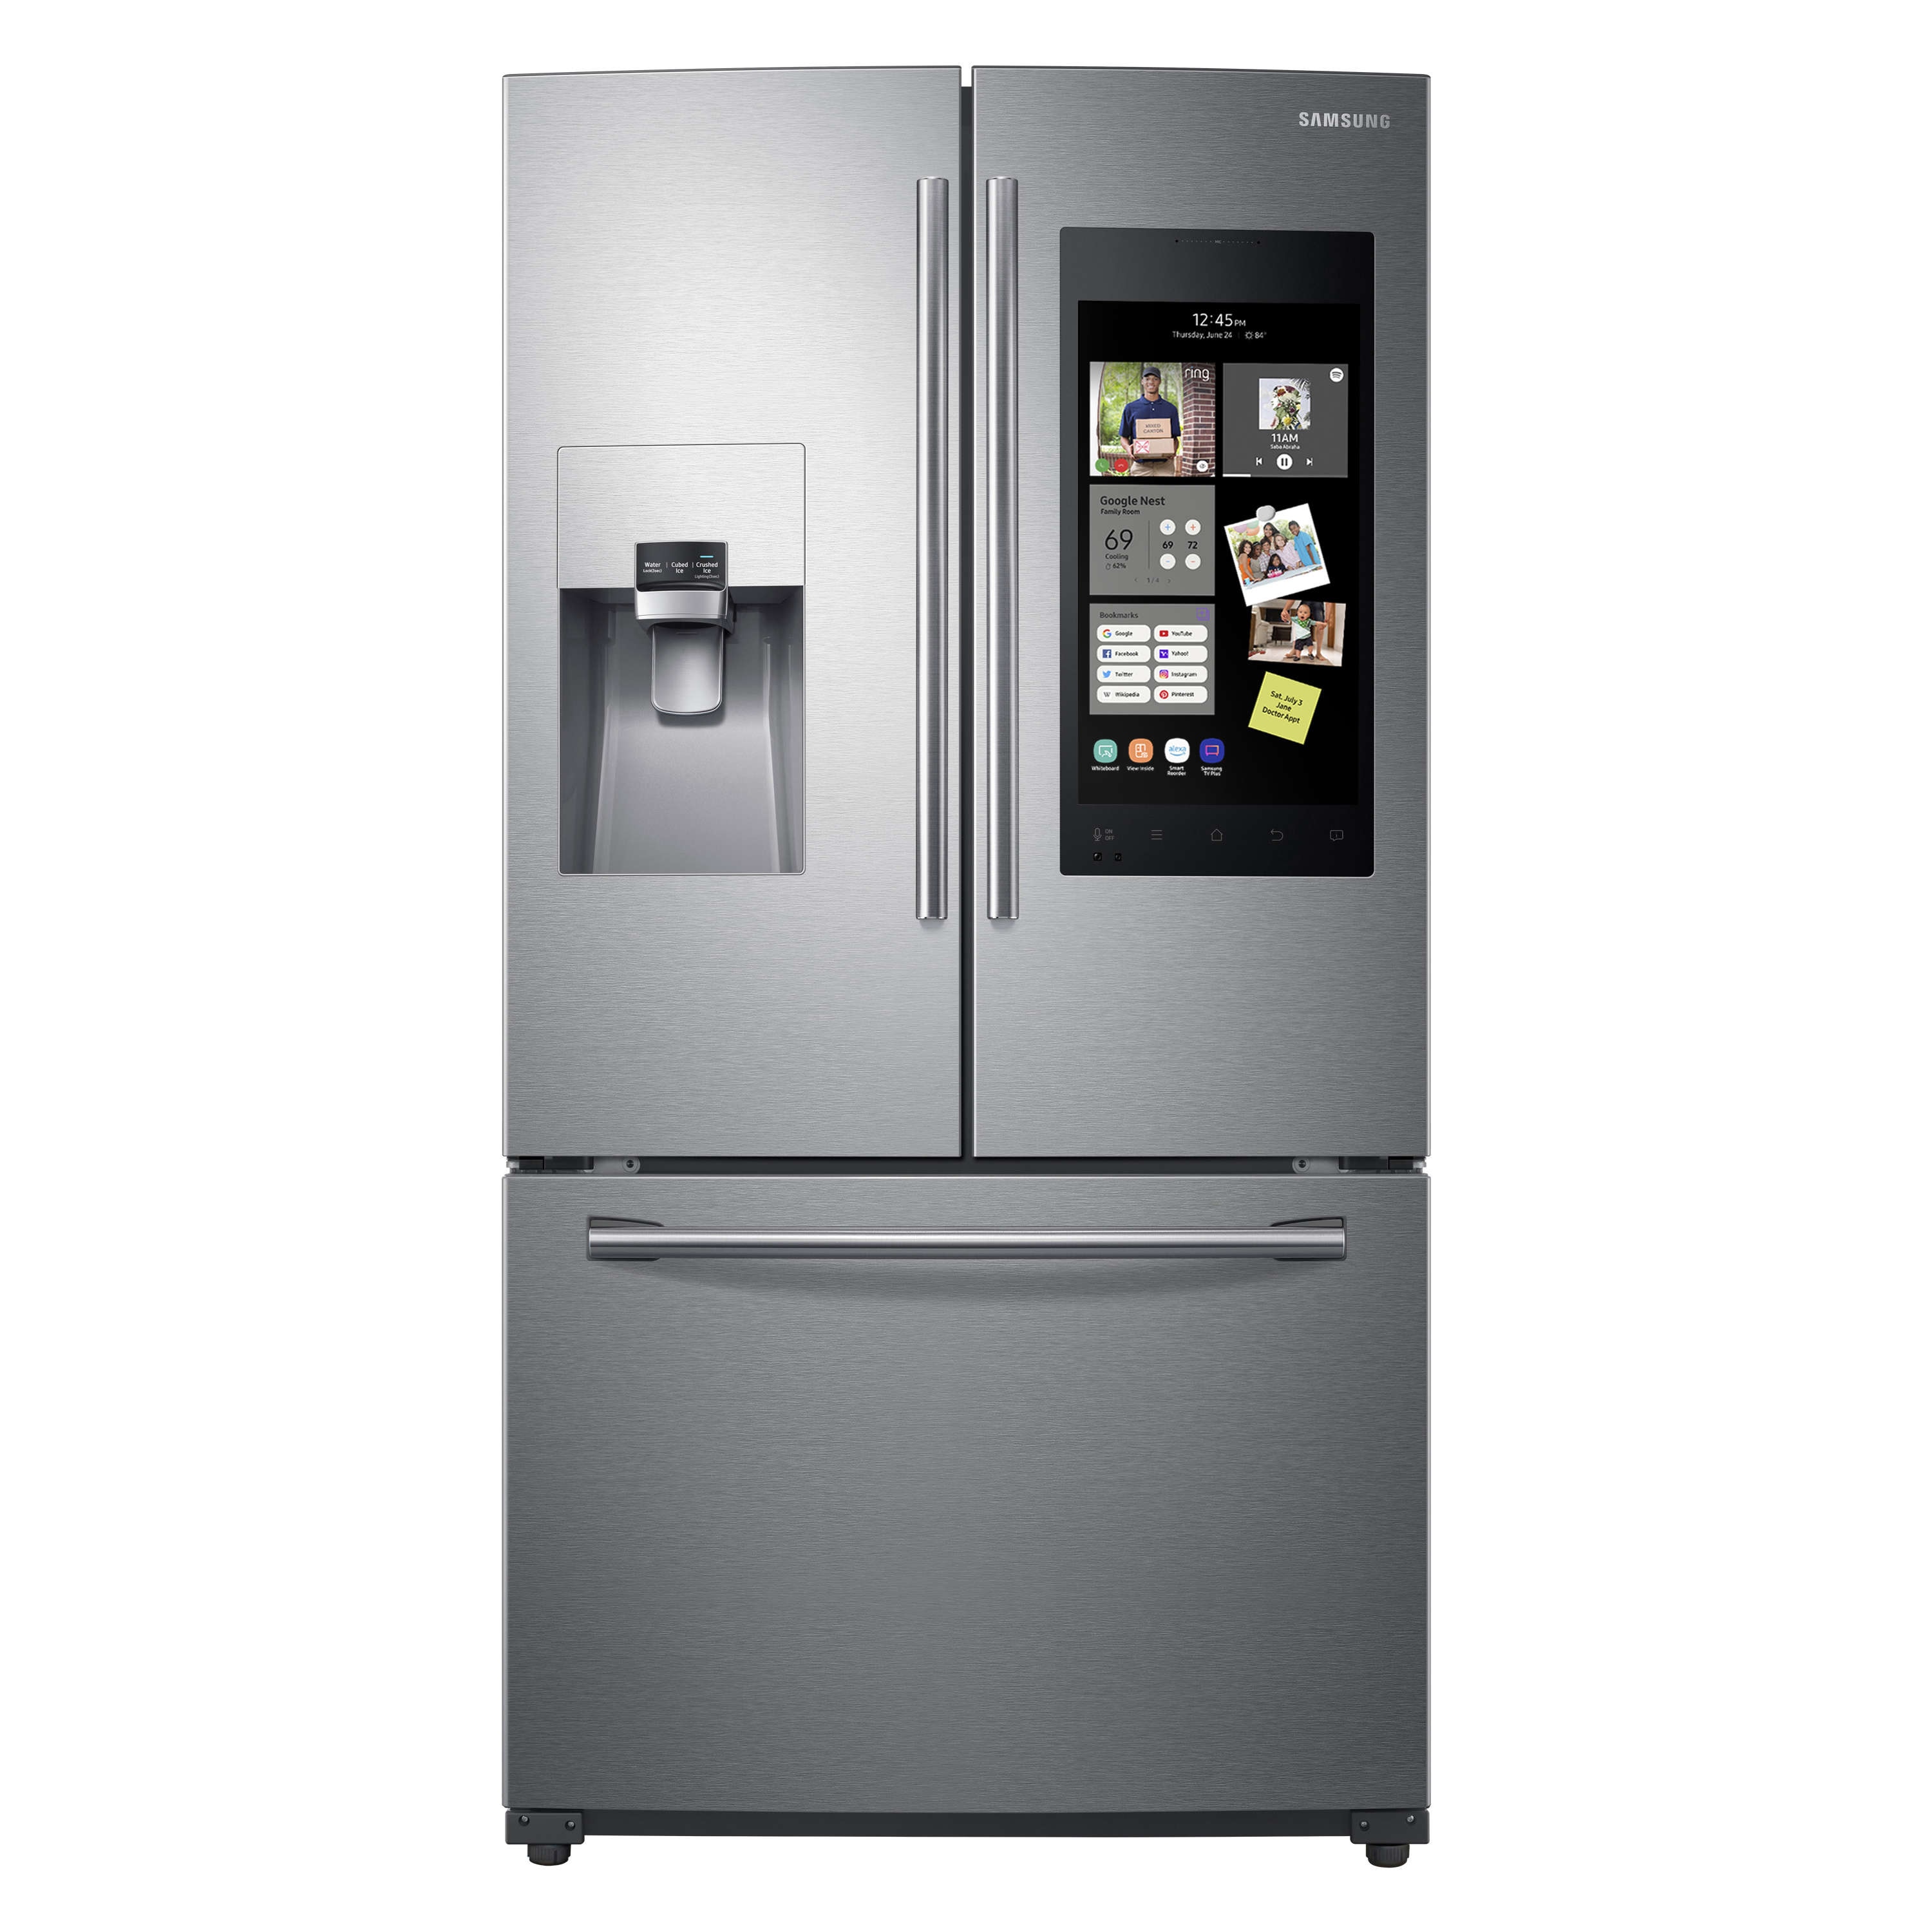 Samsung Family Hub 24.2-cu ft Smart French Door Refrigerator with Ice Maker  (Stainless Steel) ENERGY STAR at